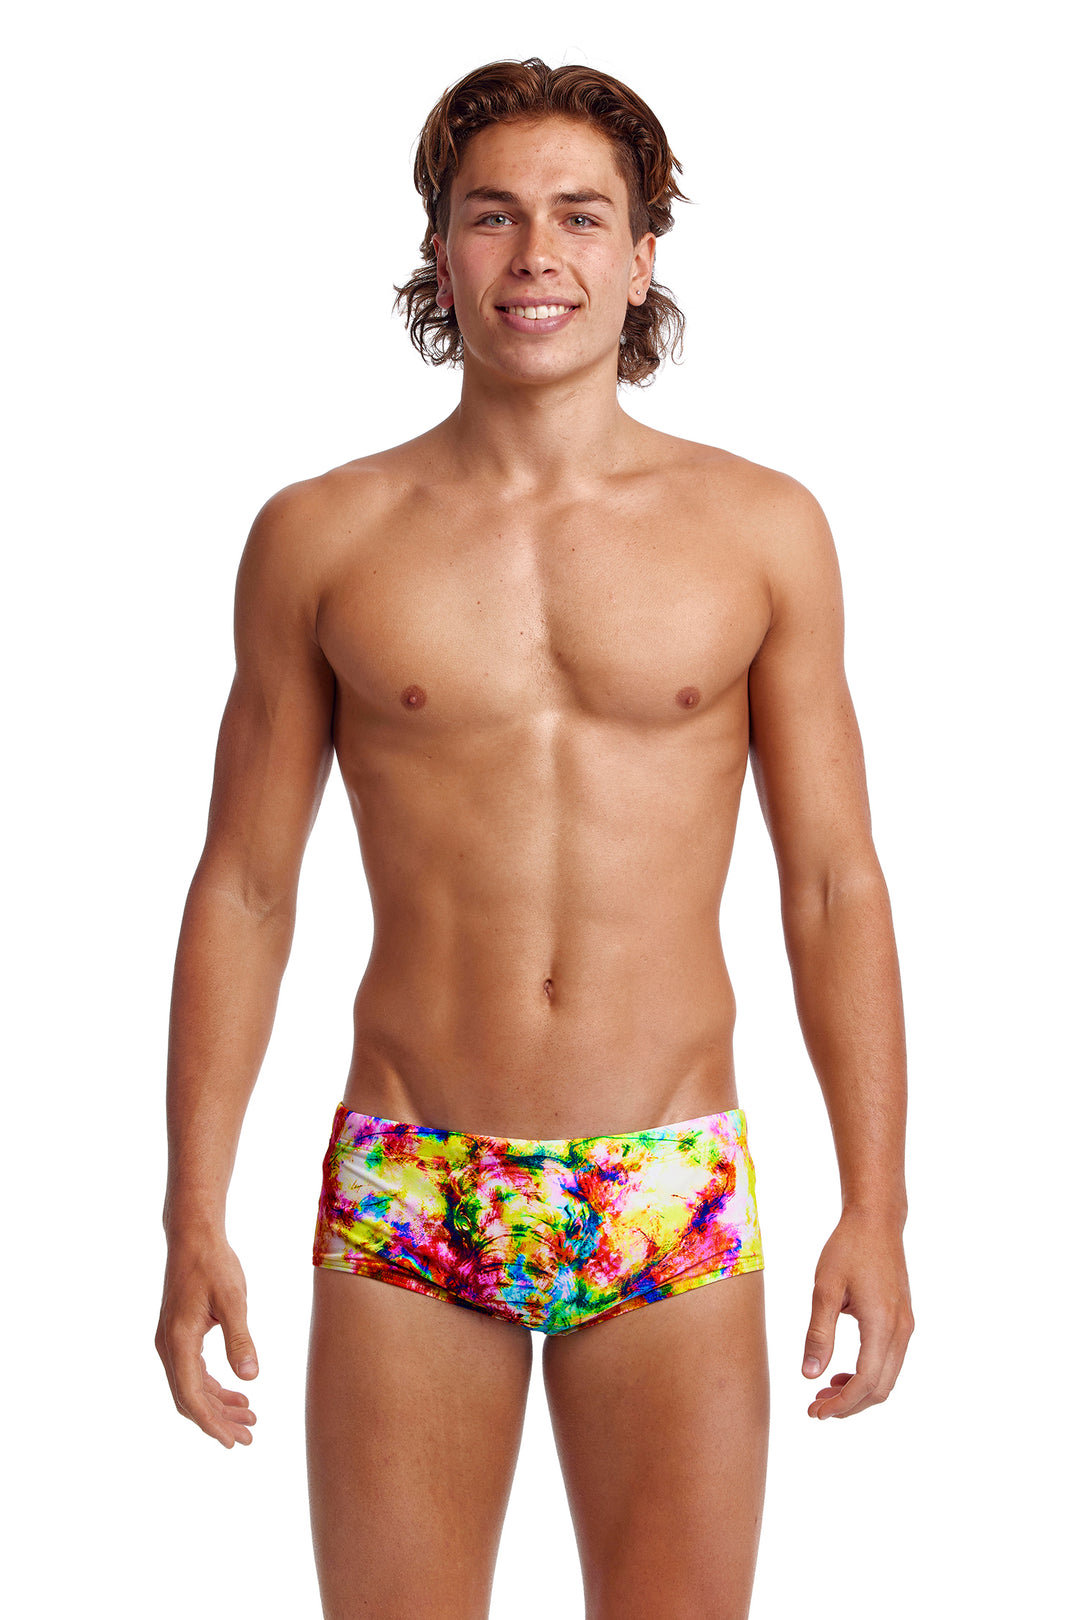 Out Trumped Sidewinder Trunks Swimsuit FTS010M - Men's